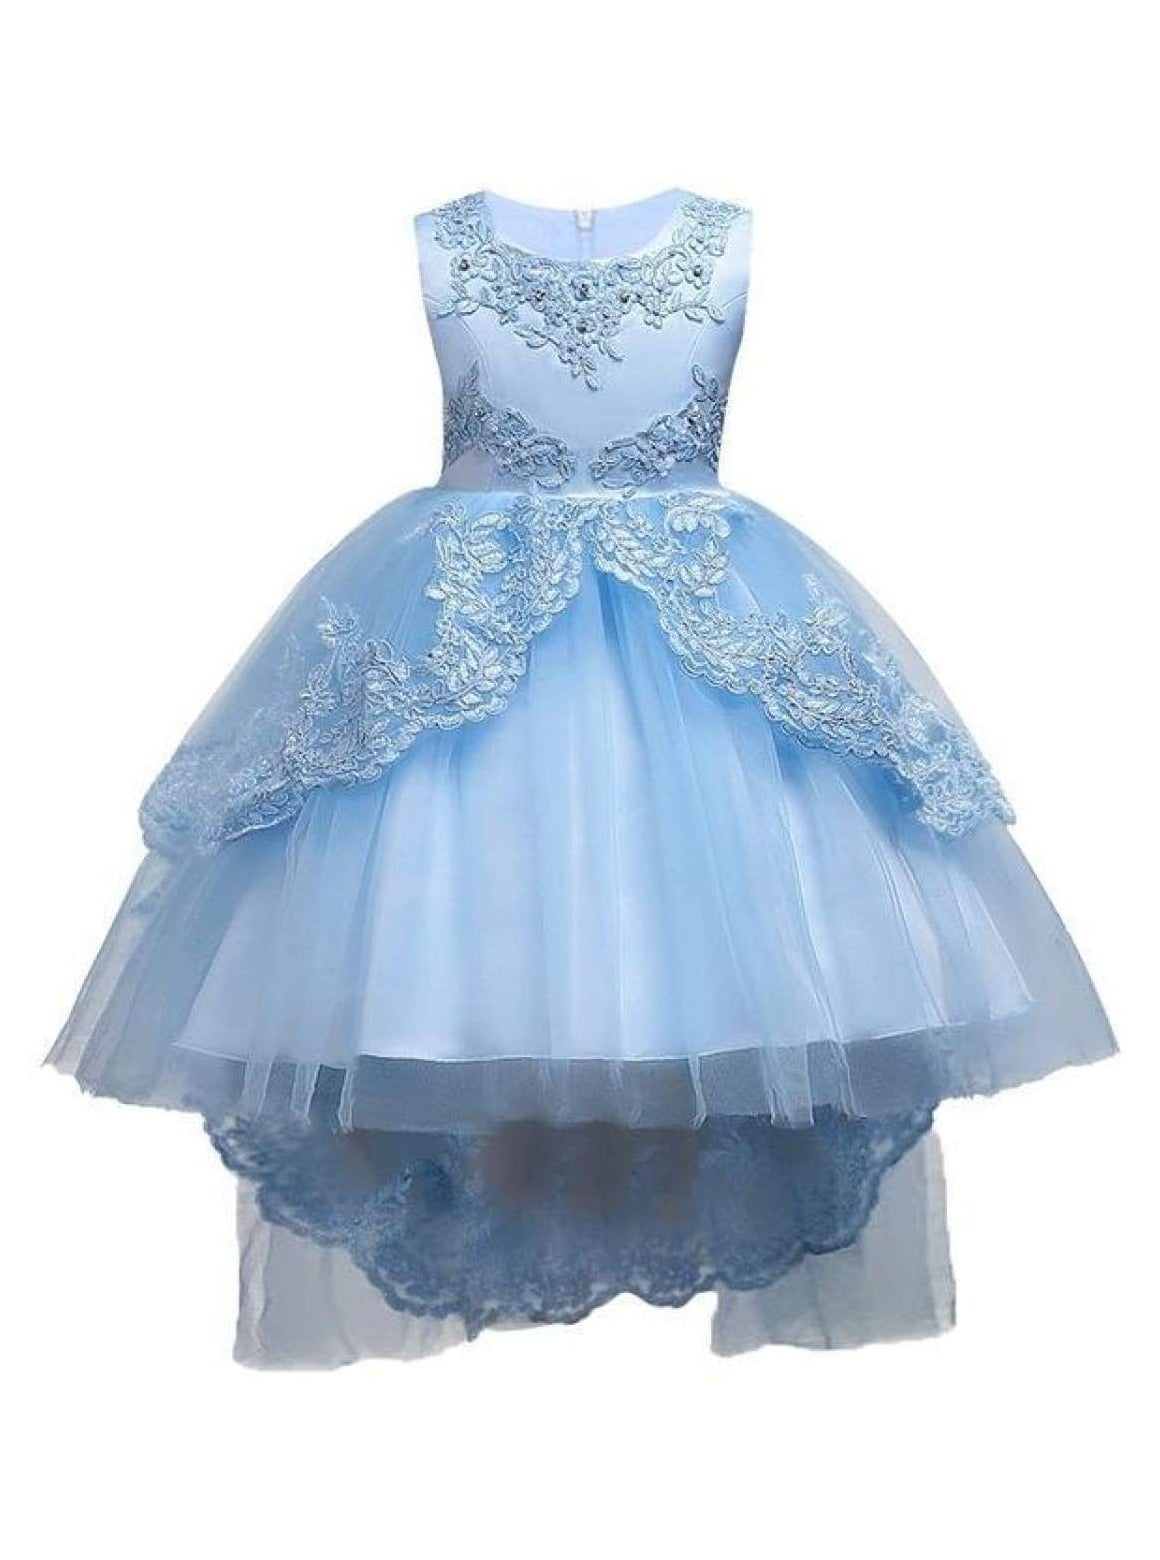 Spring Party Dresses | Girls Pearl Embroidered Hi-Lo Princess Dress ...